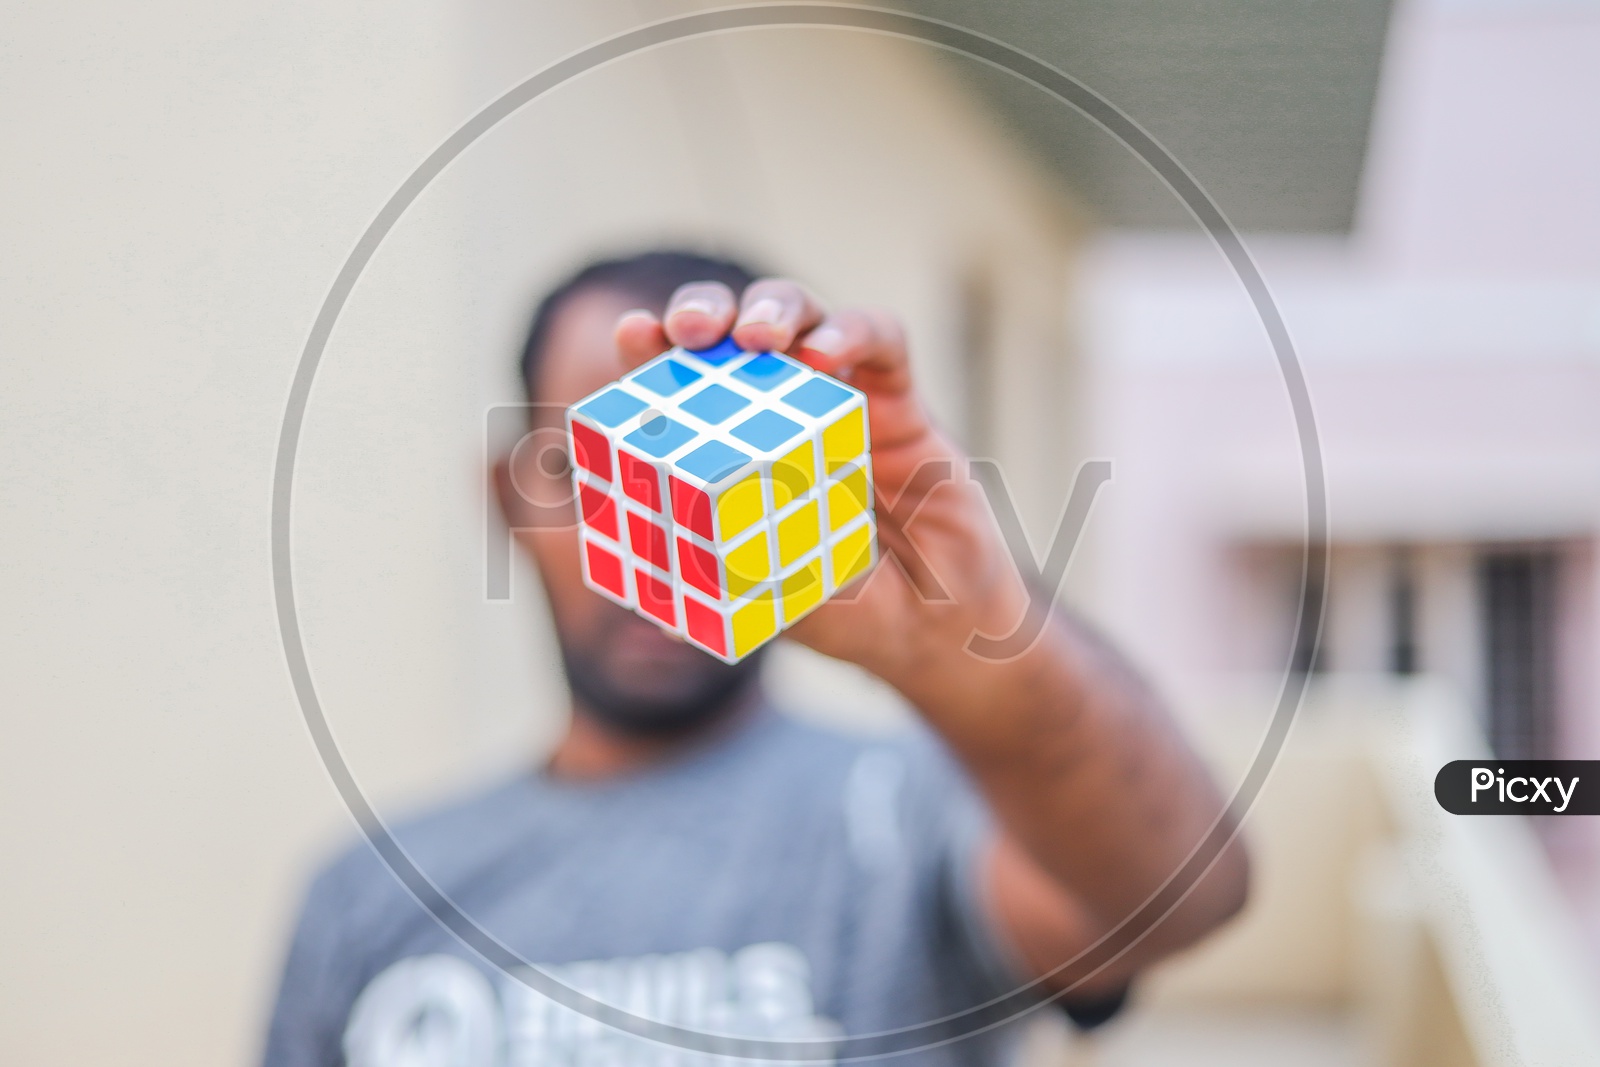 Hands and Rubik's cube puzzle isolated